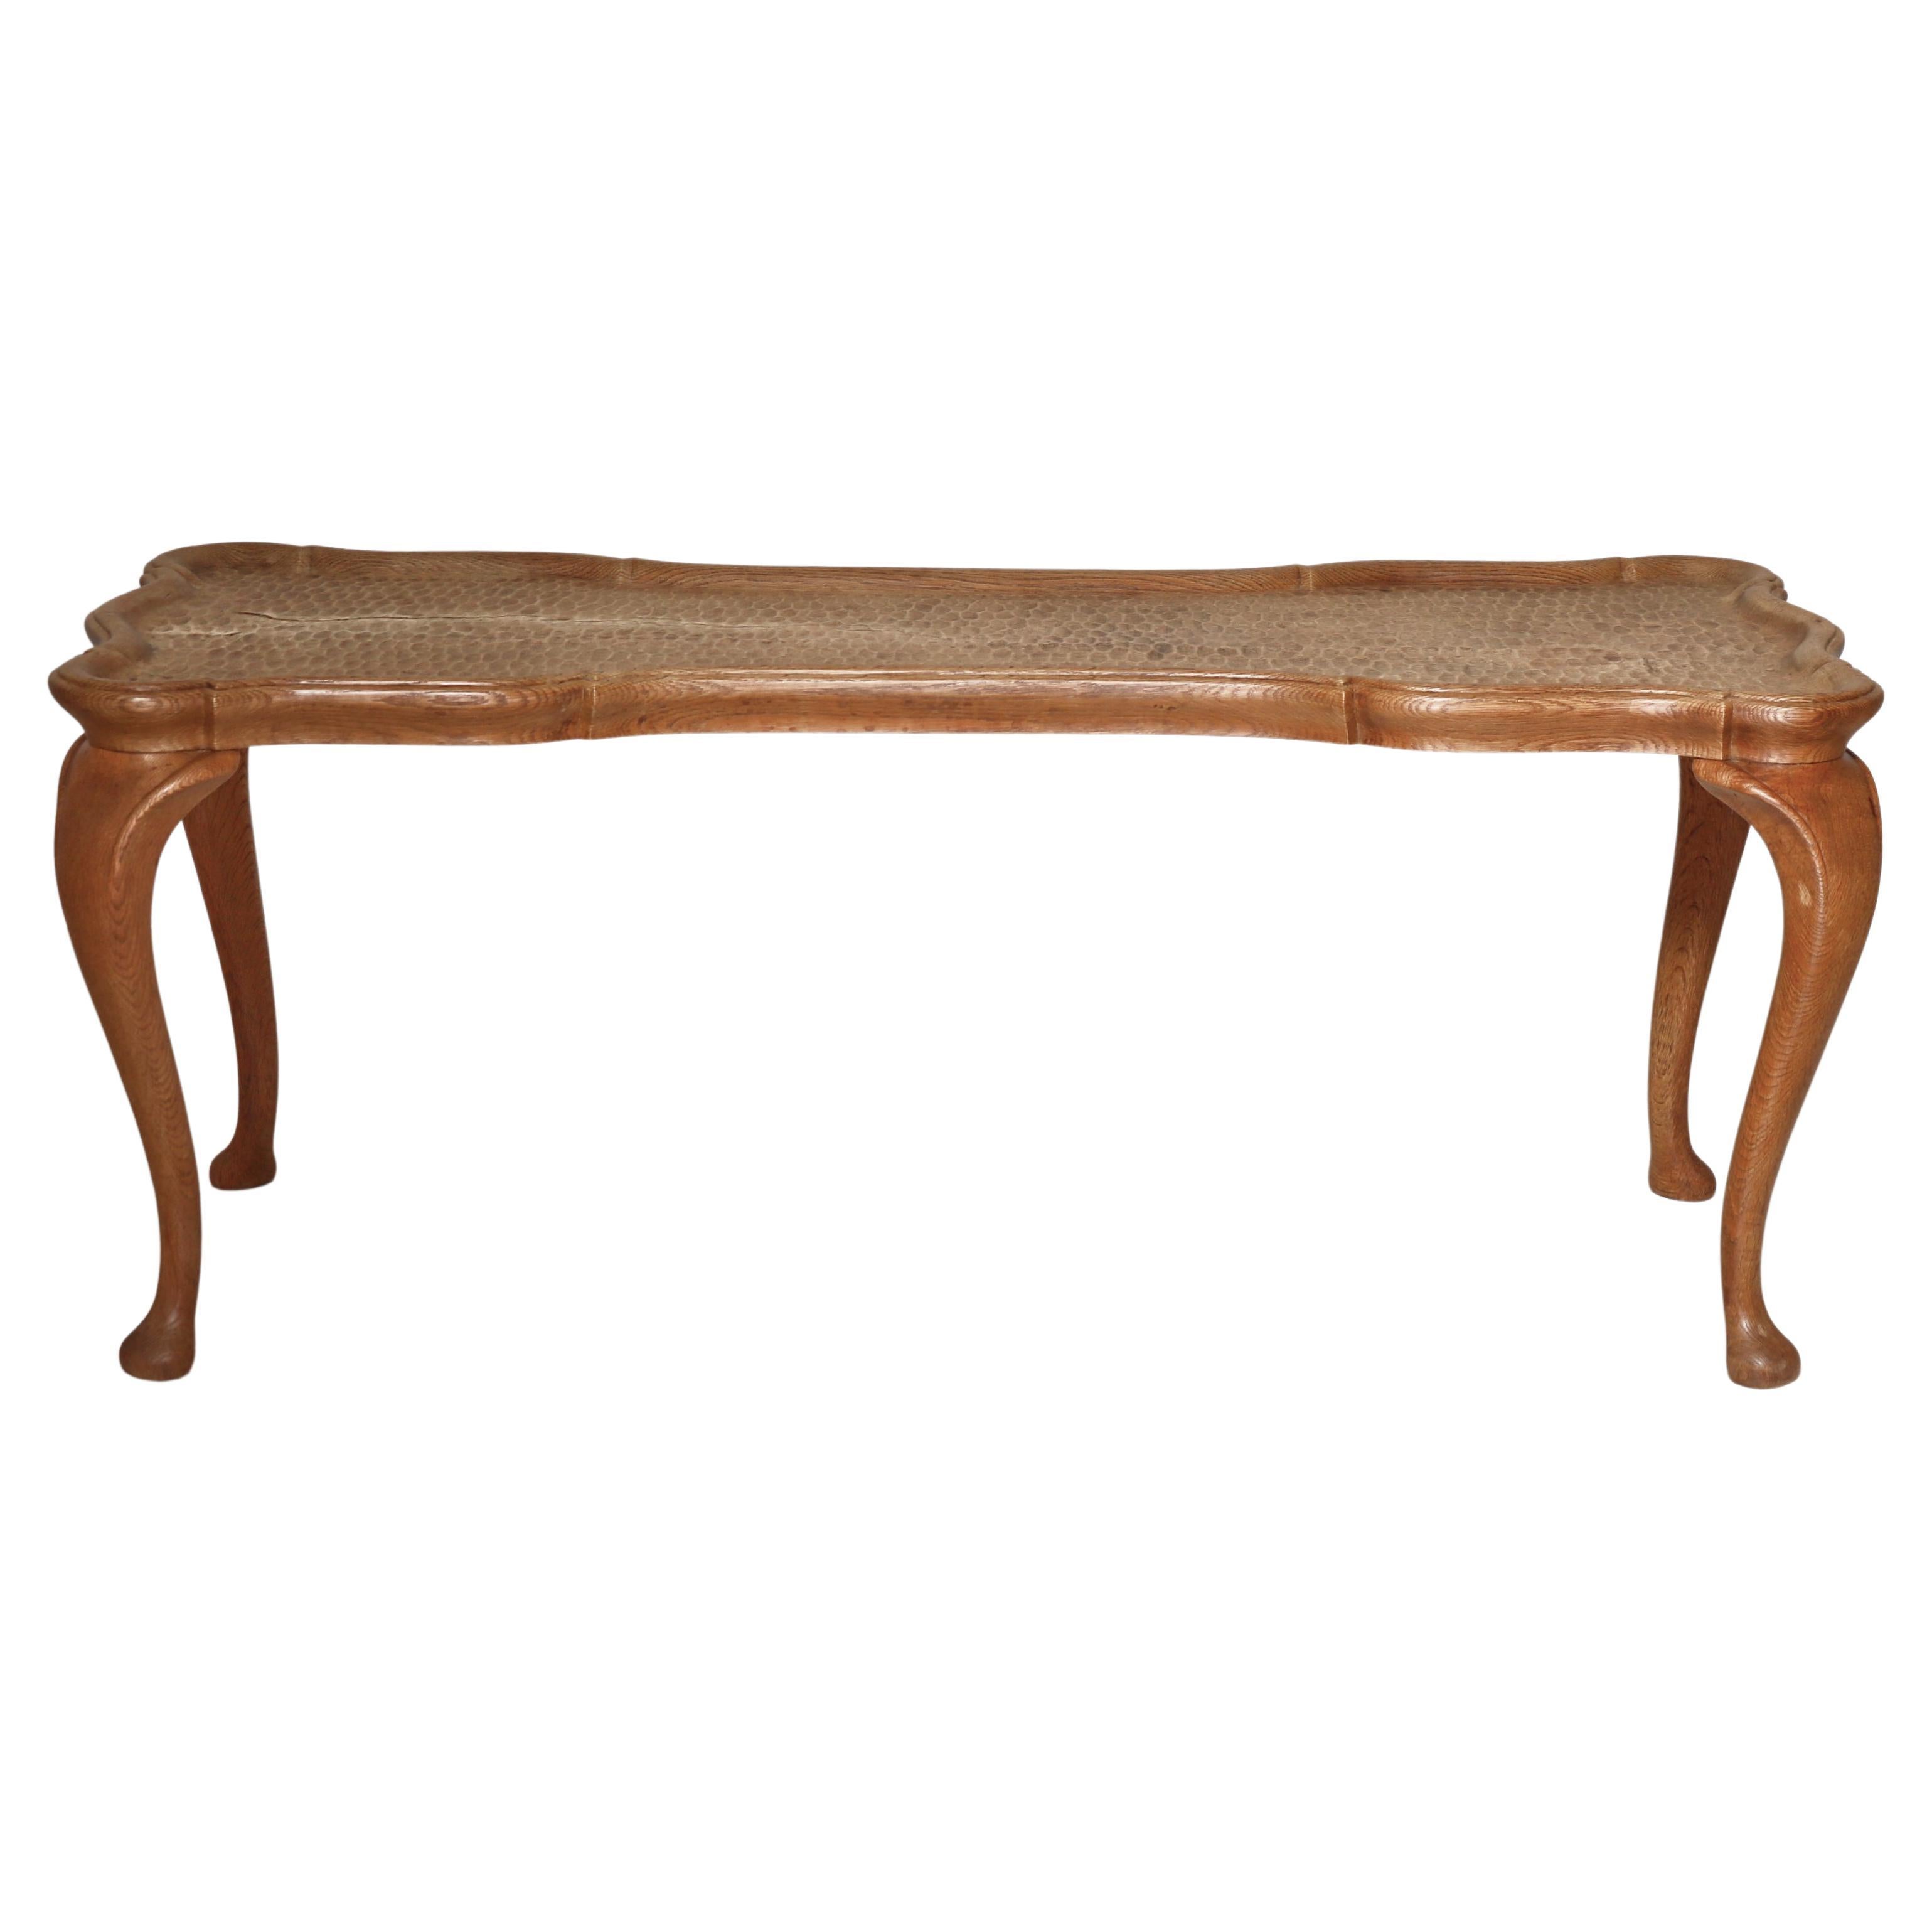 Frits Henningsen Carved Coffee Table with Gouged Top Solid Oak, Denmark, 1940s For Sale